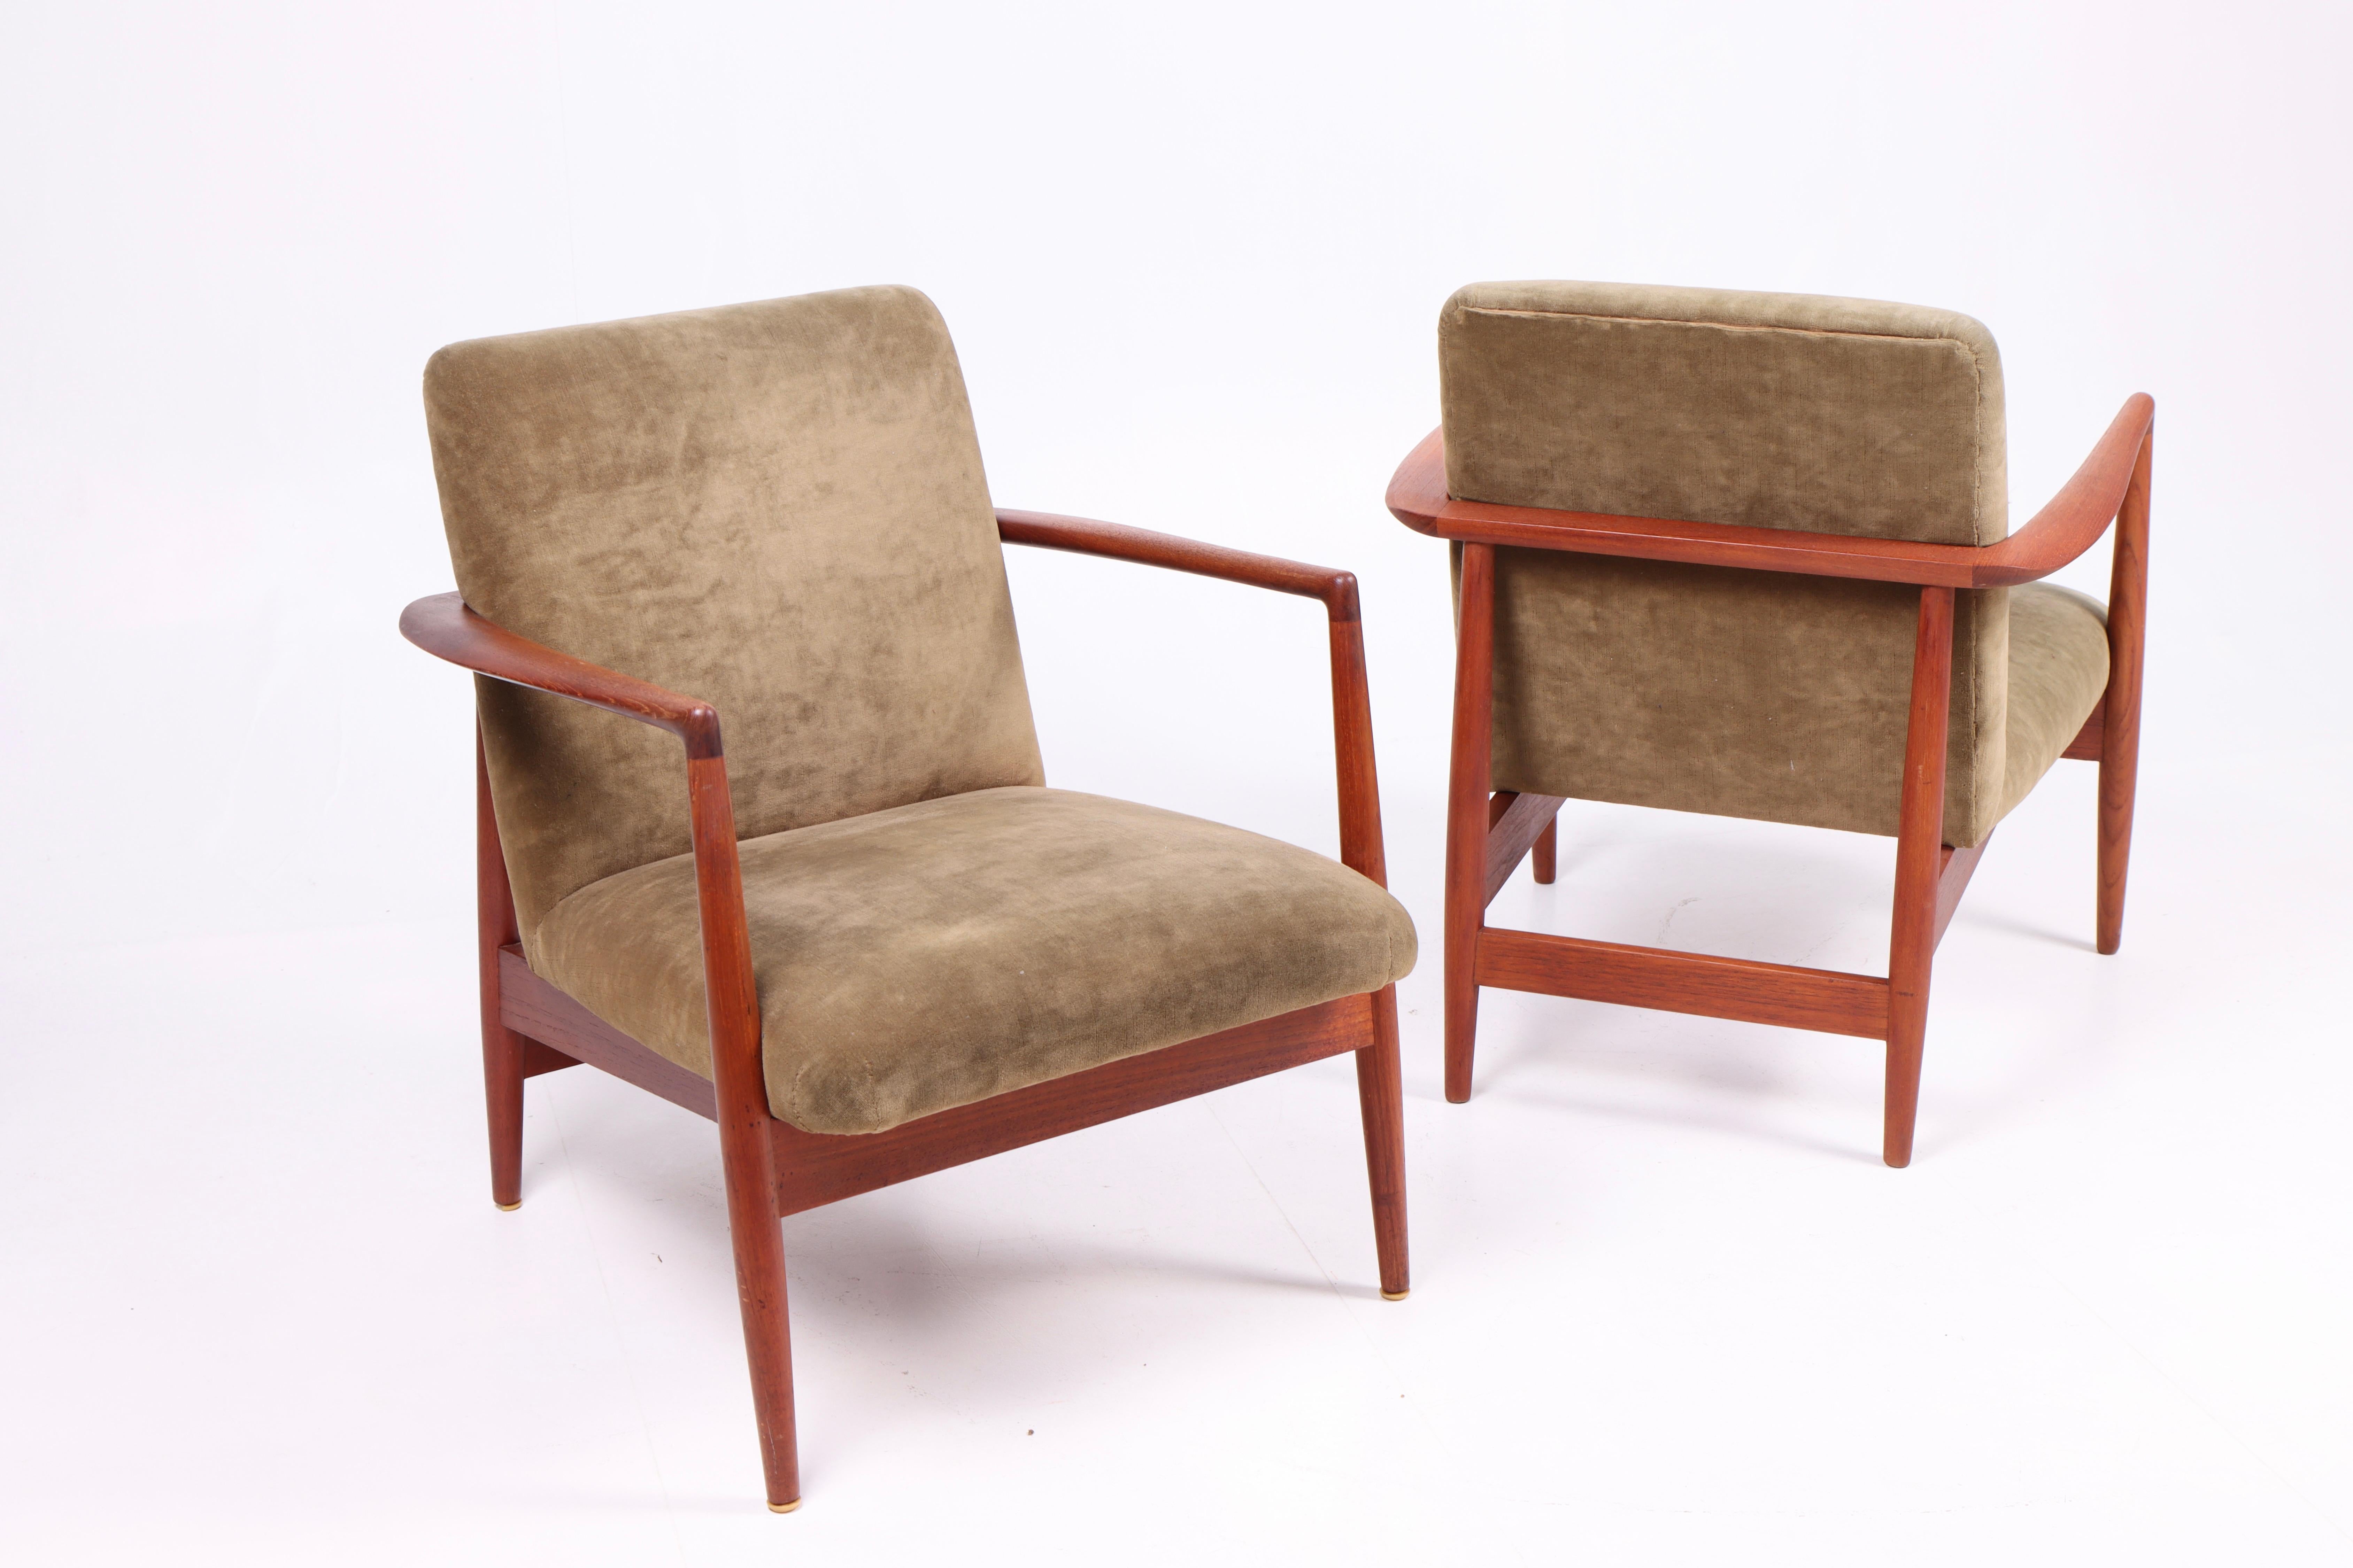 Fabric Pair of Midcentury Lounge Chairs in Teak and Velvet by C.B Hansen, 1950s For Sale